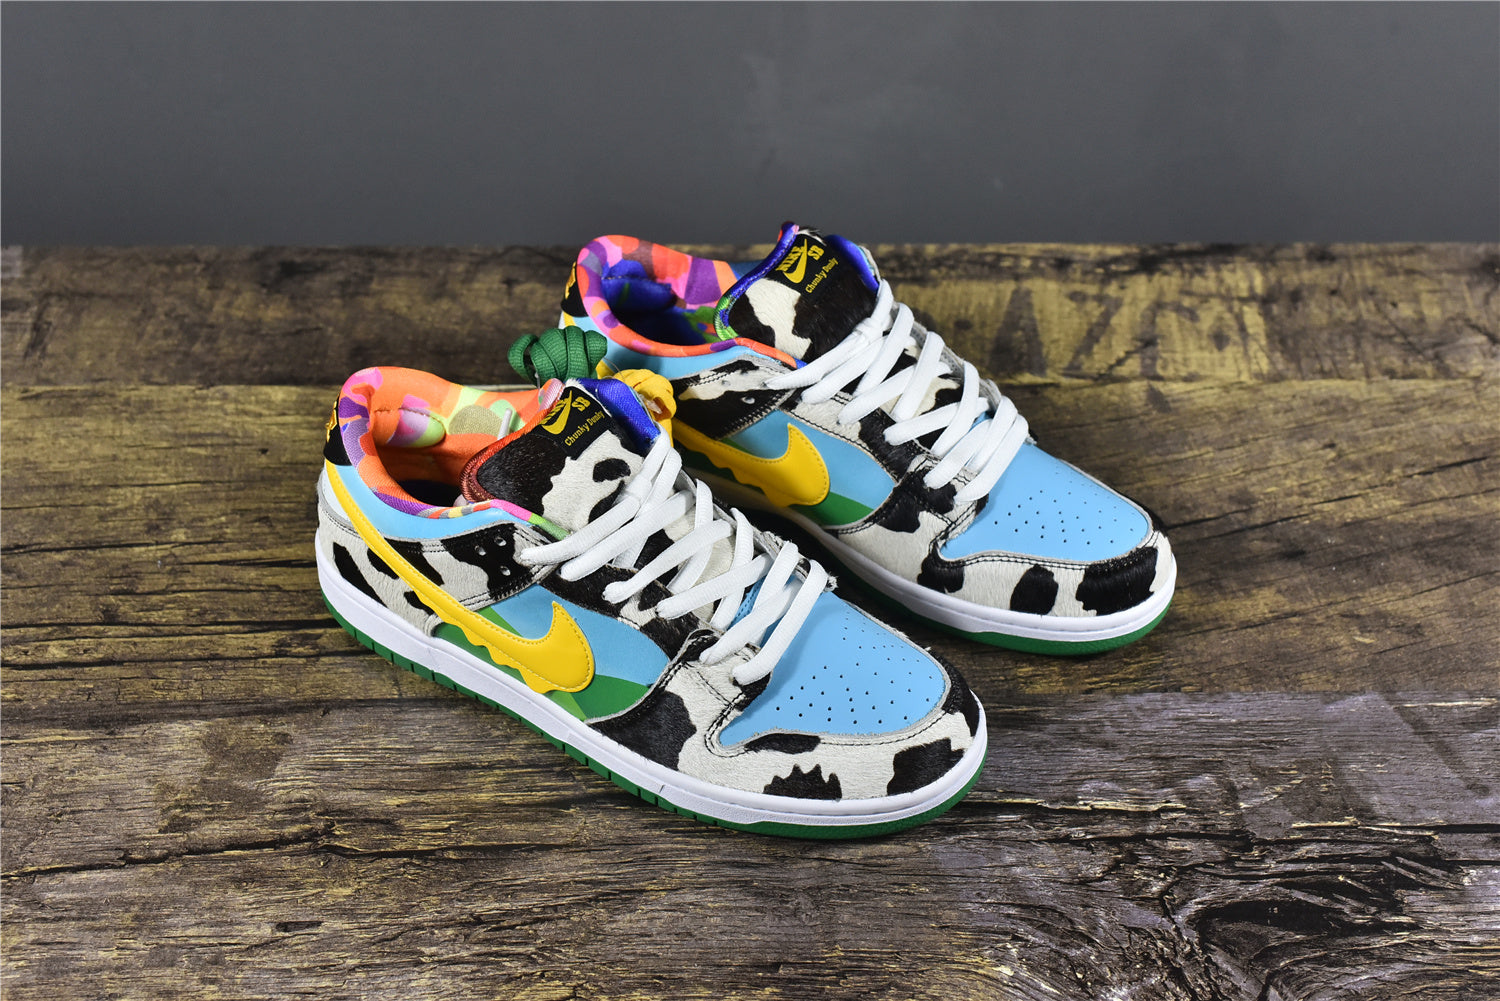 SB DUNK Low 'Ben & Jerry's Chunky Dunky'